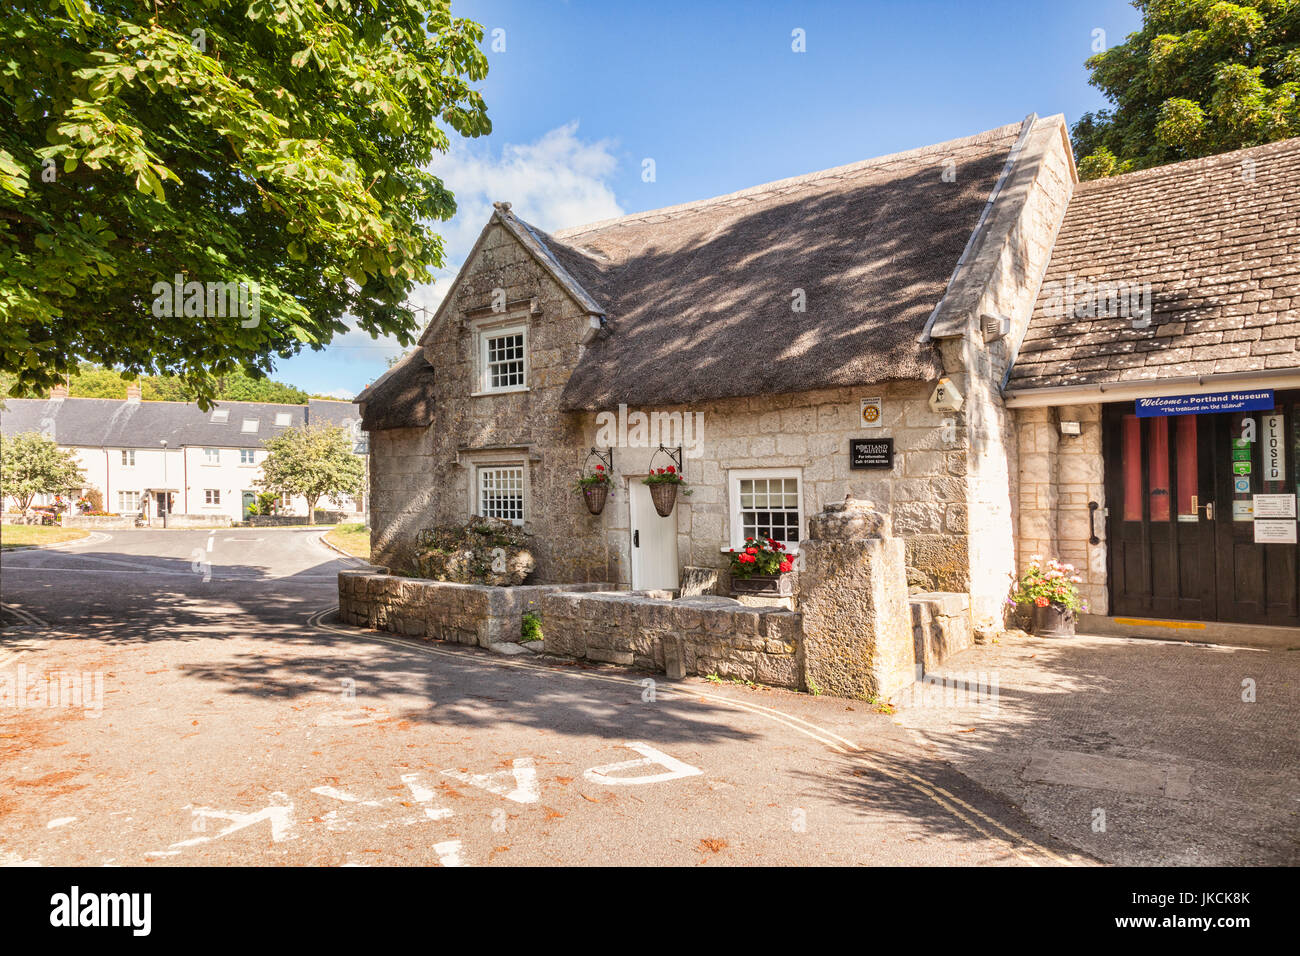 2 July 2017: Portland Bill, Dorset, England, UK - The Portland Museum, with its thatched roof, in the village of Wakeham, above Church Ope cove. Stock Photo